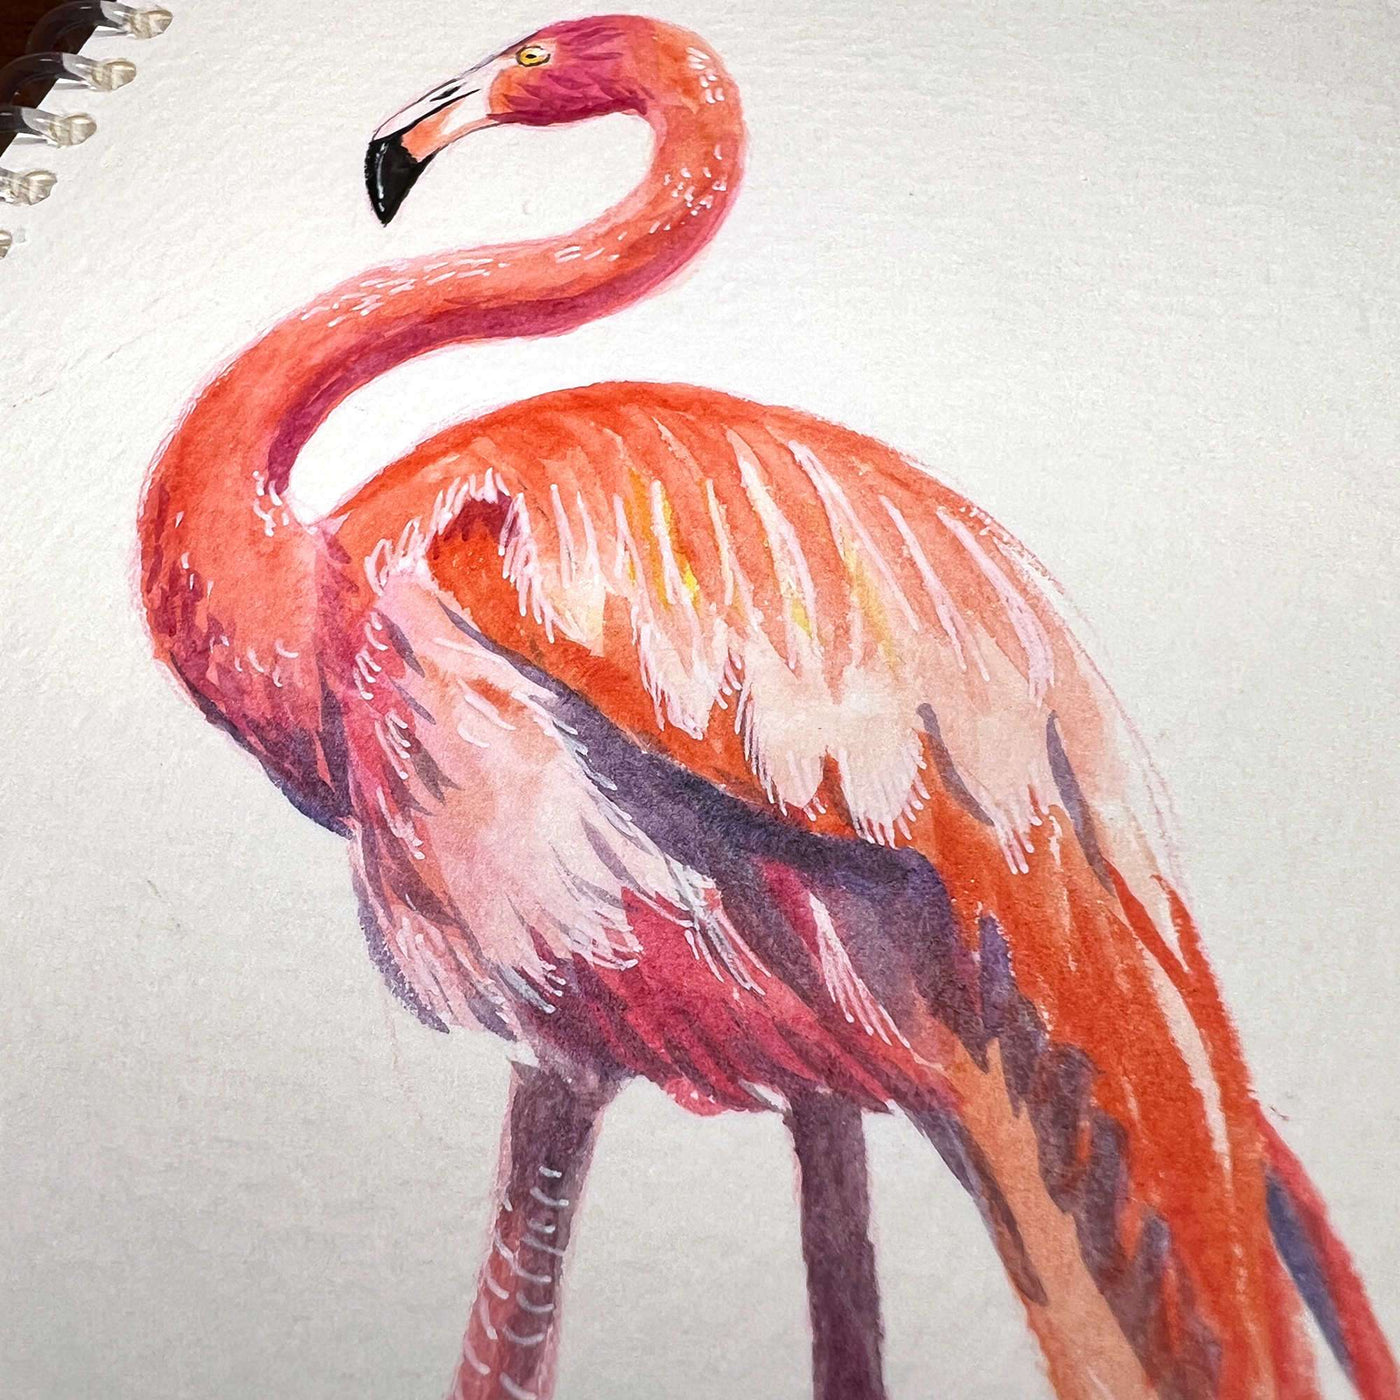 Detailed watercolor of a pink flamingo in a sketchbook.